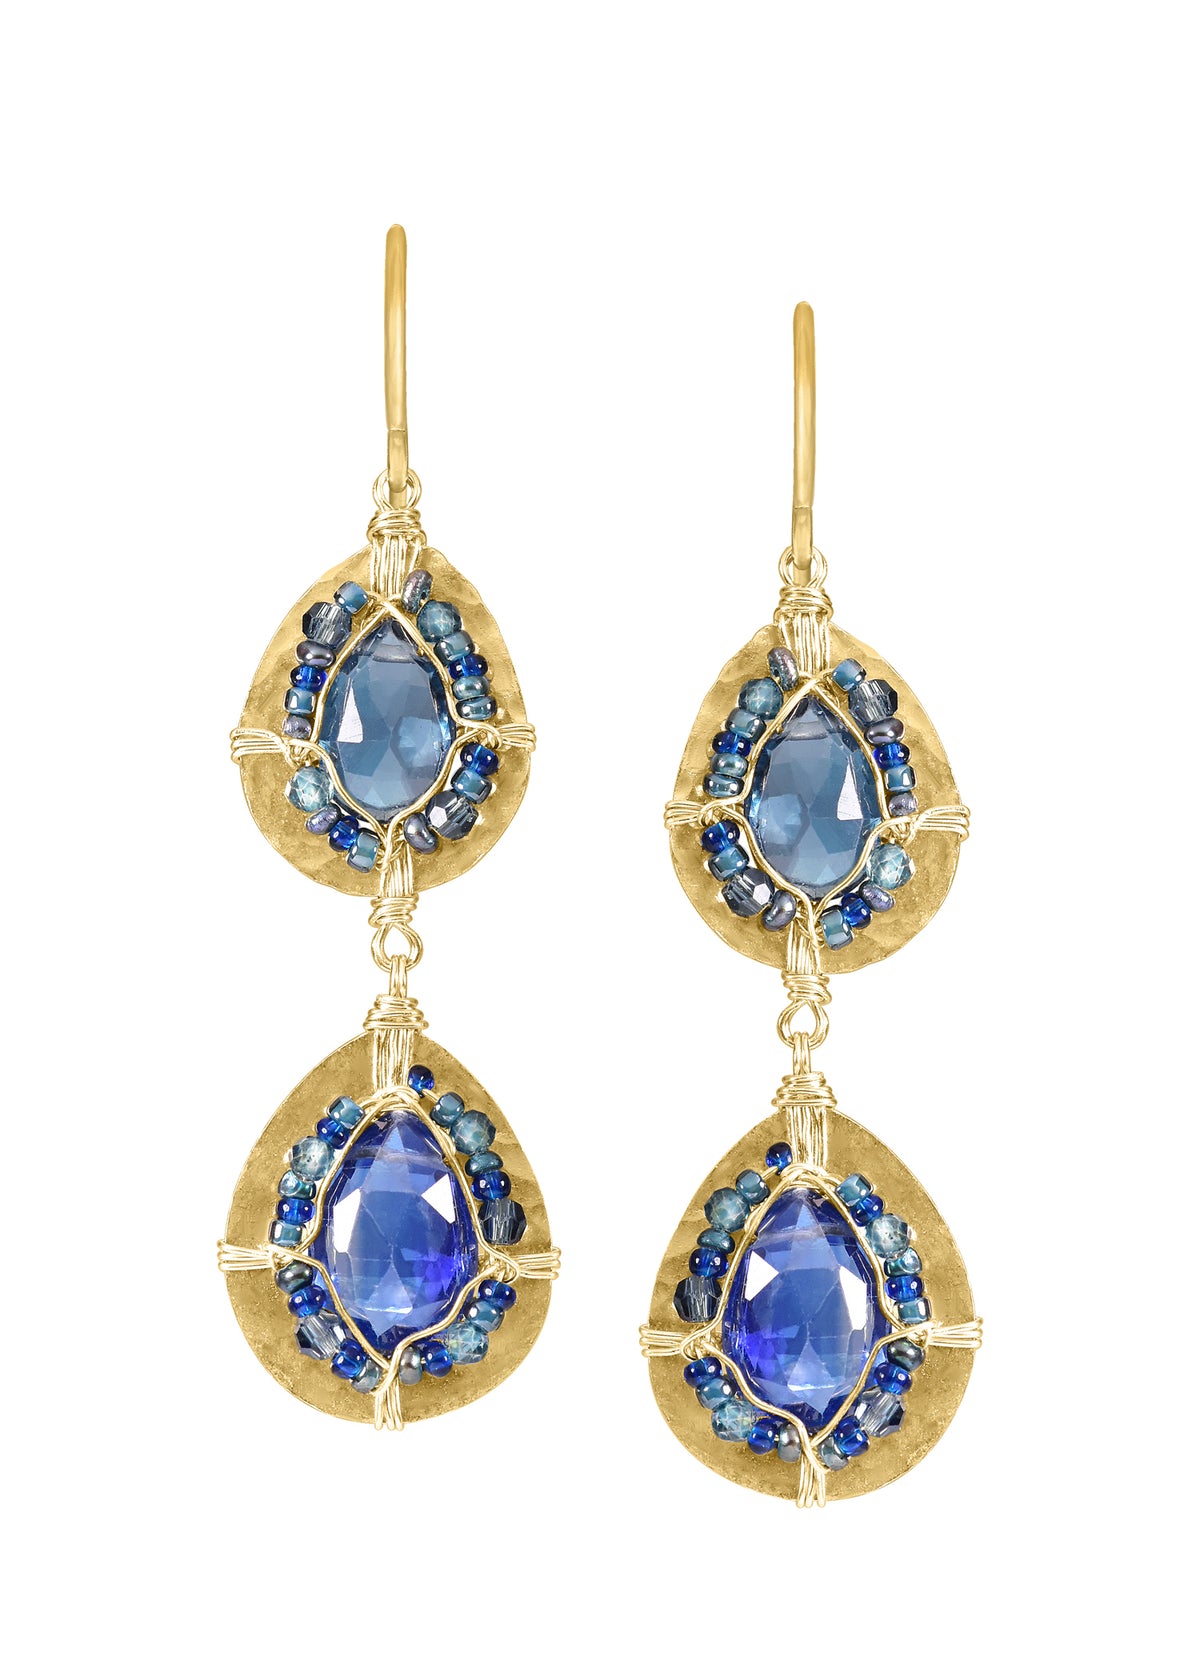 Kyanite Blue quartz Crystal Seed beads 14k gold fill Earrings measure 1-7/8&quot;&quot; in length (including the ear wires) and 1/2&quot; in width at the widest point Handmade in our Los Angeles studio